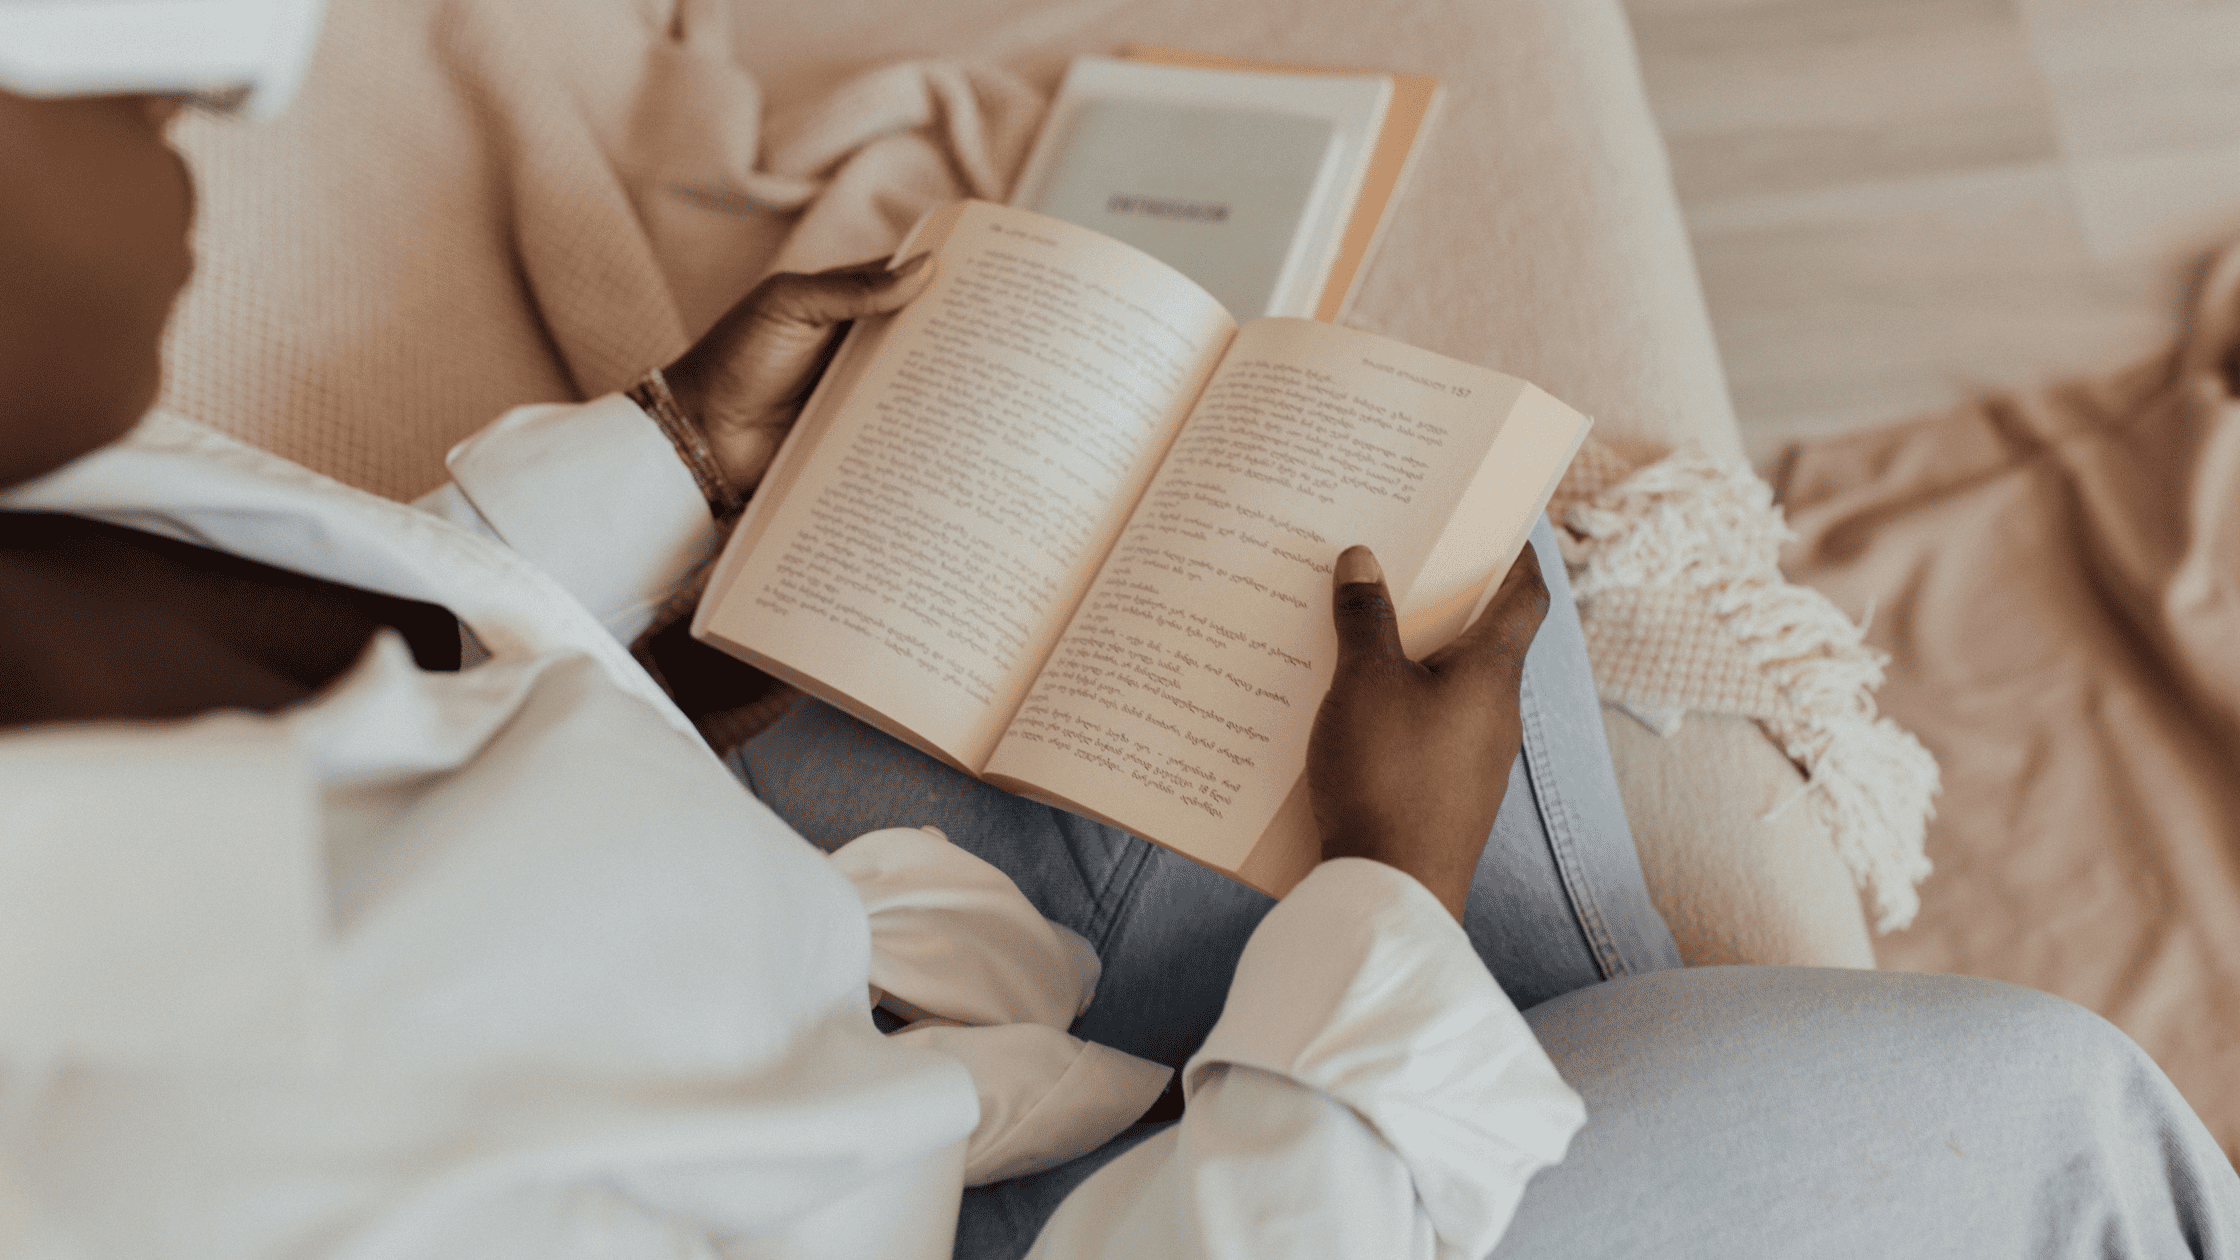 How to Start Reading Again After a Reading Slump